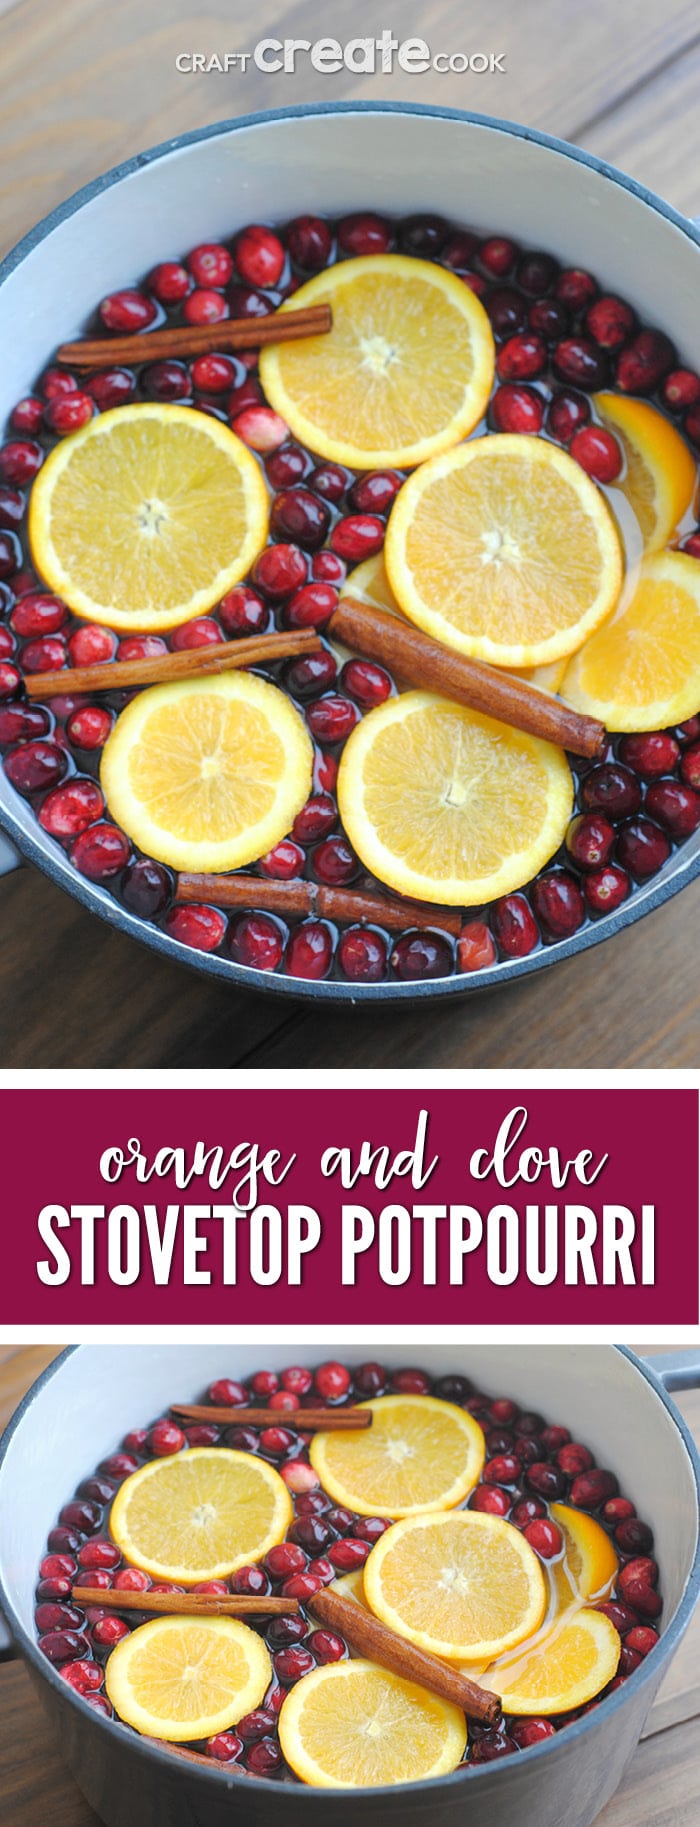 Make your home smell heavenly this holiday season with our homemade cranberry, orange & clove stovetop potpourri!